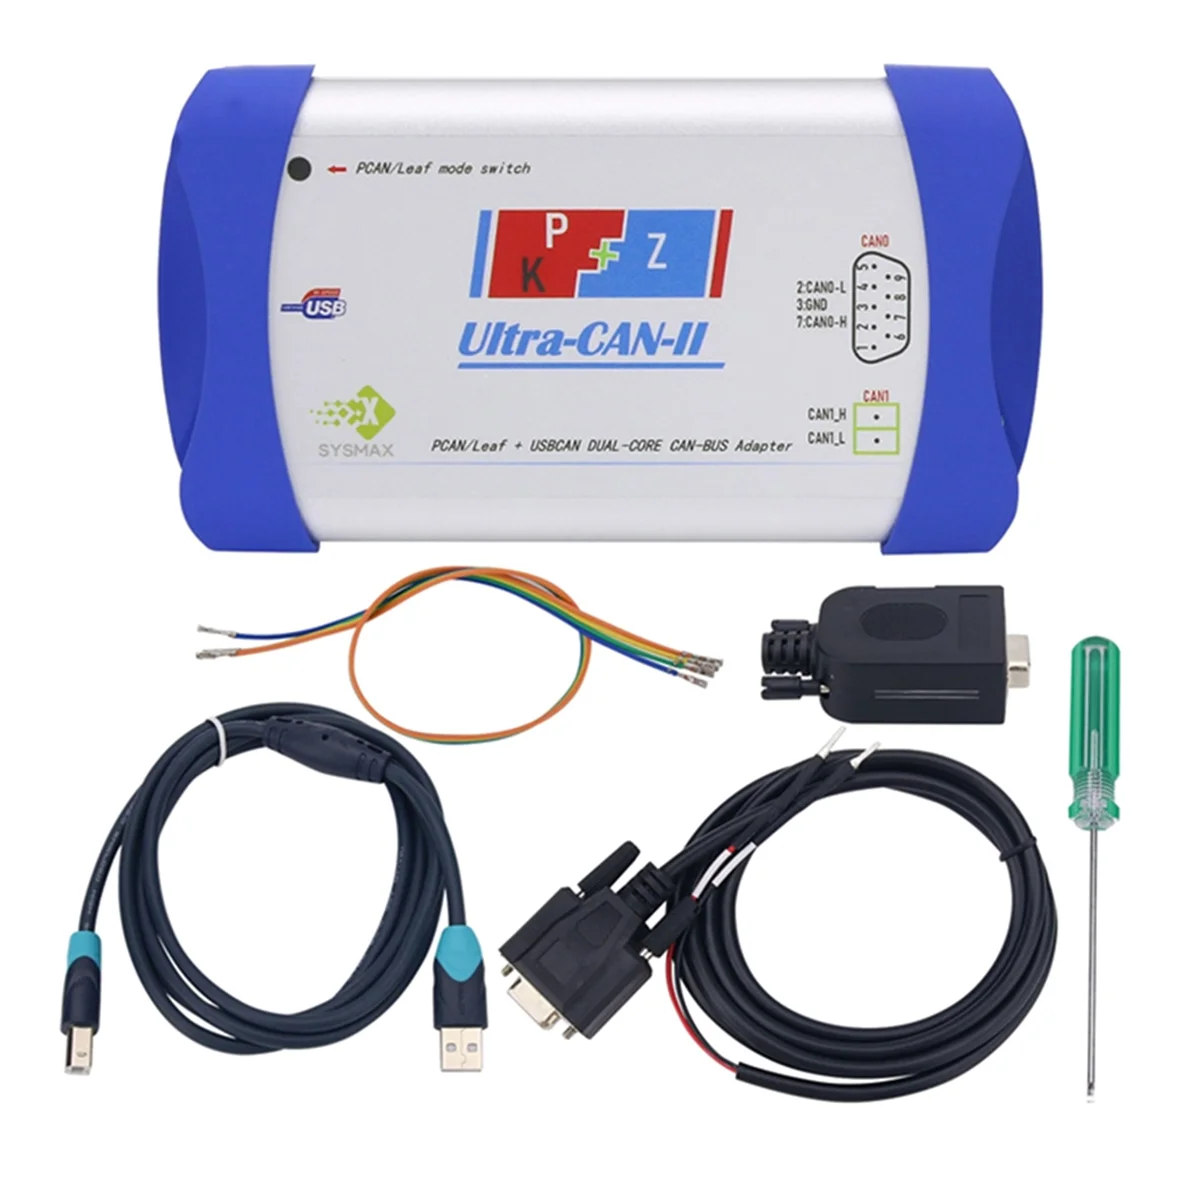 

Ultra-CAN-II CAN Analyzer CAN Box New Energy Tool Supports for USBCAN + PCAN/Kvaser + Dual Mode